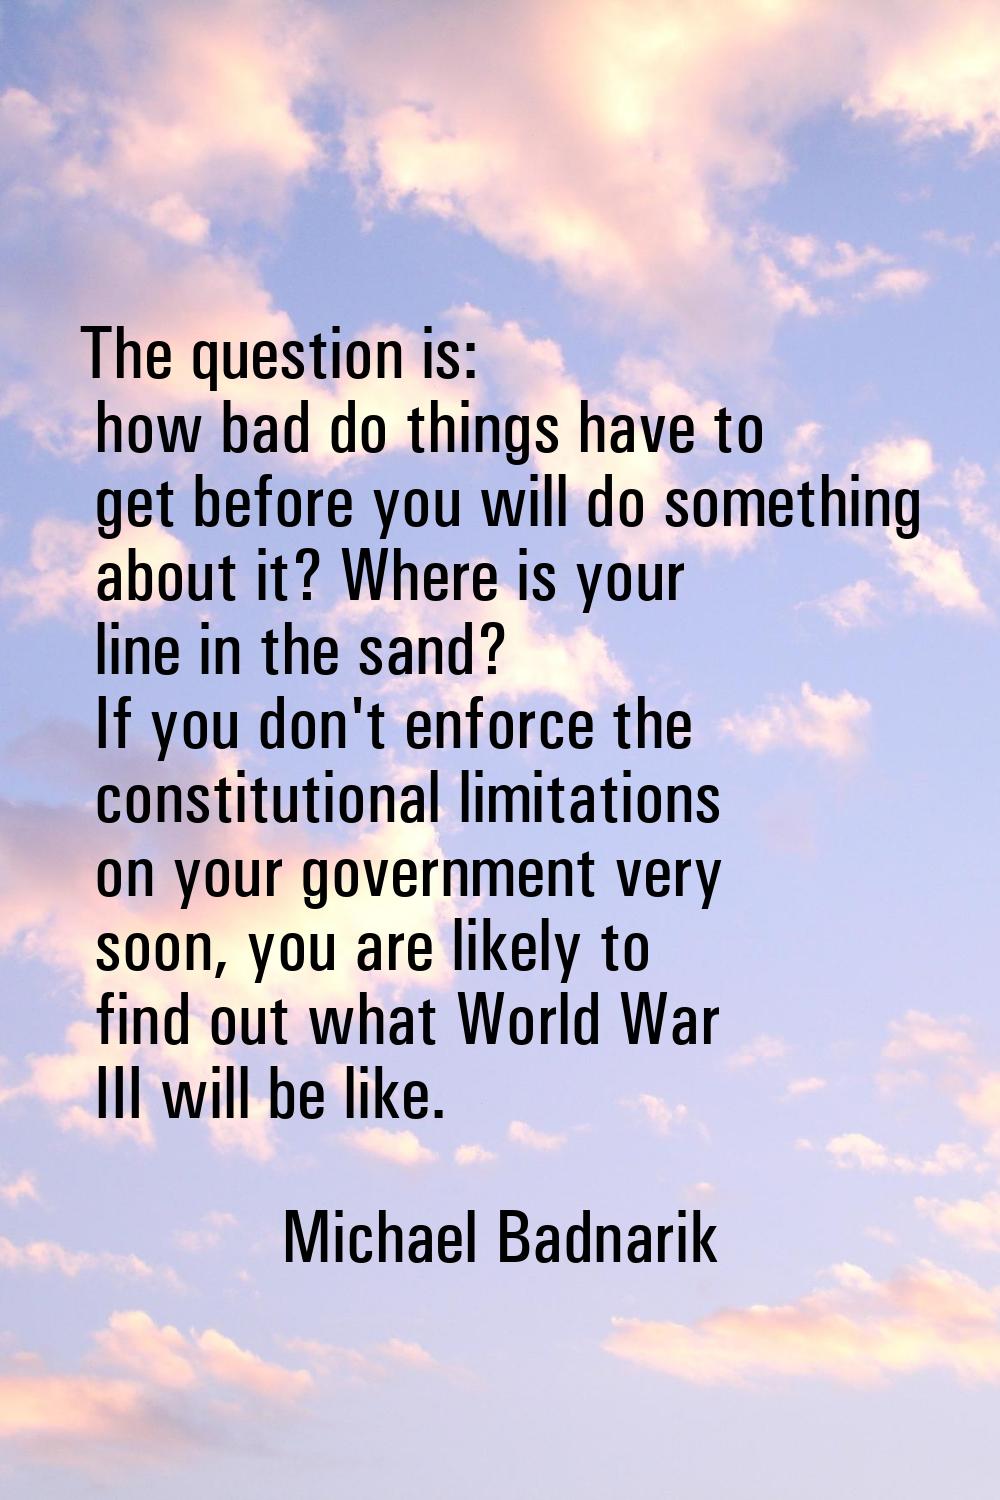 The question is: how bad do things have to get before you will do something about it? Where is your